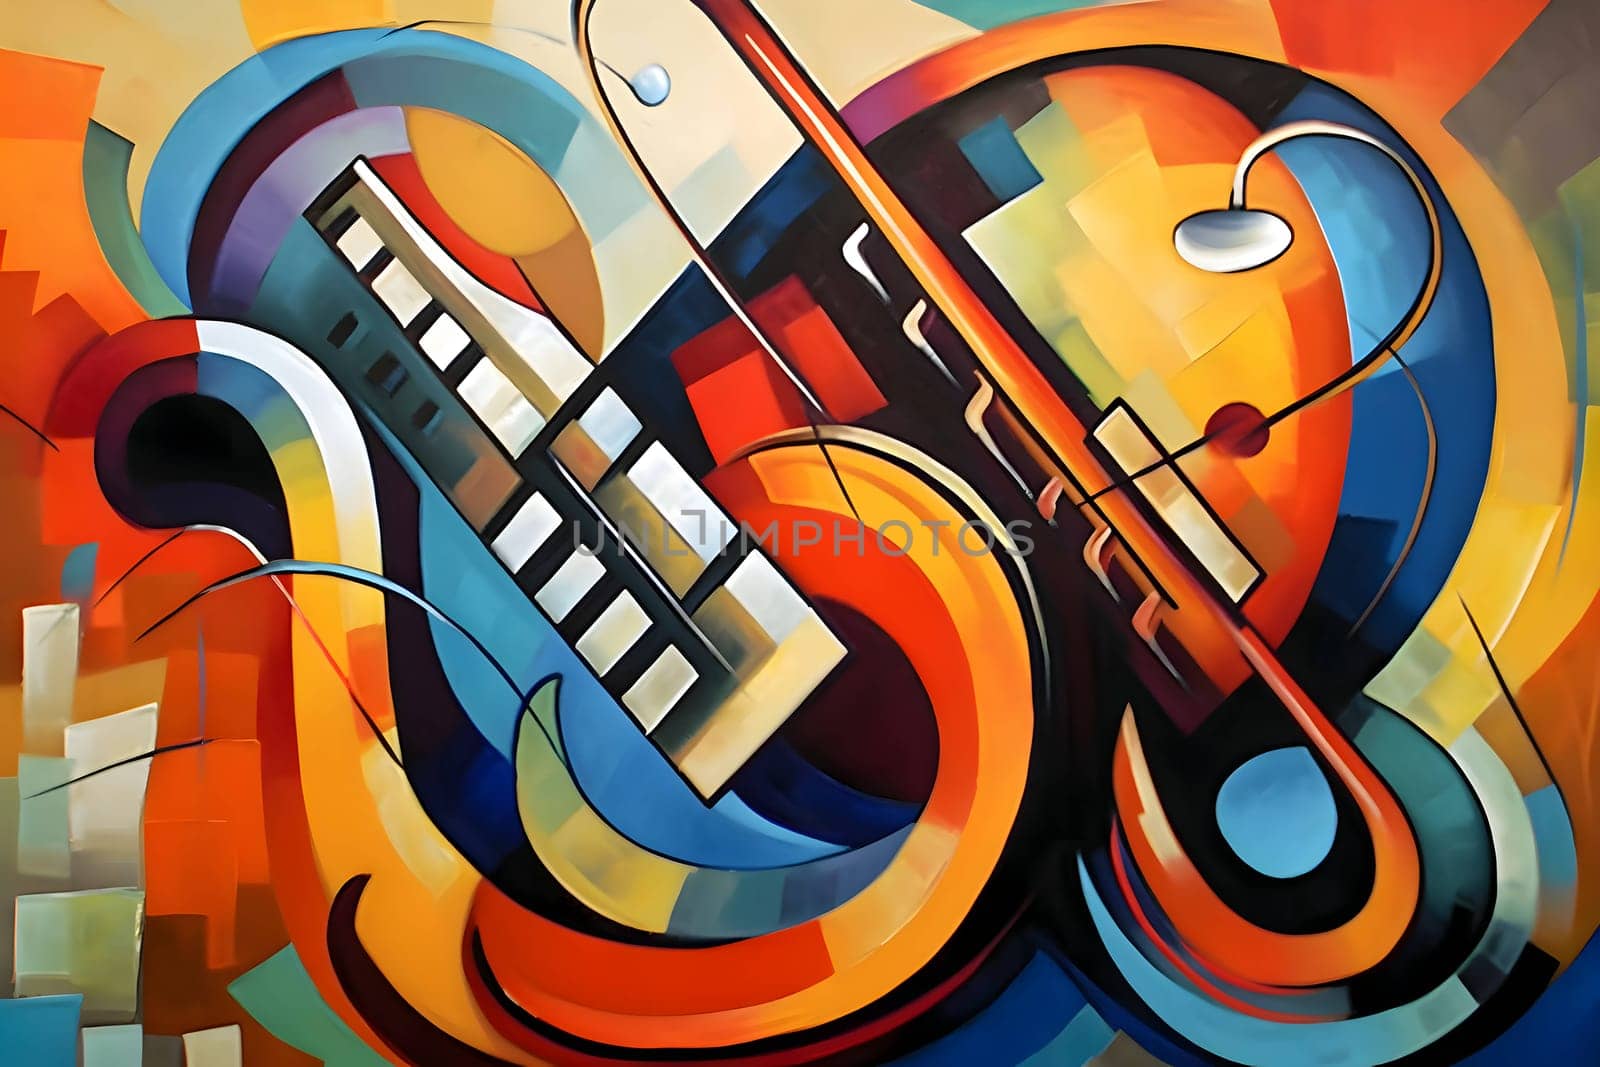 abstract color design art illustration with music note in the middle by ThemesS